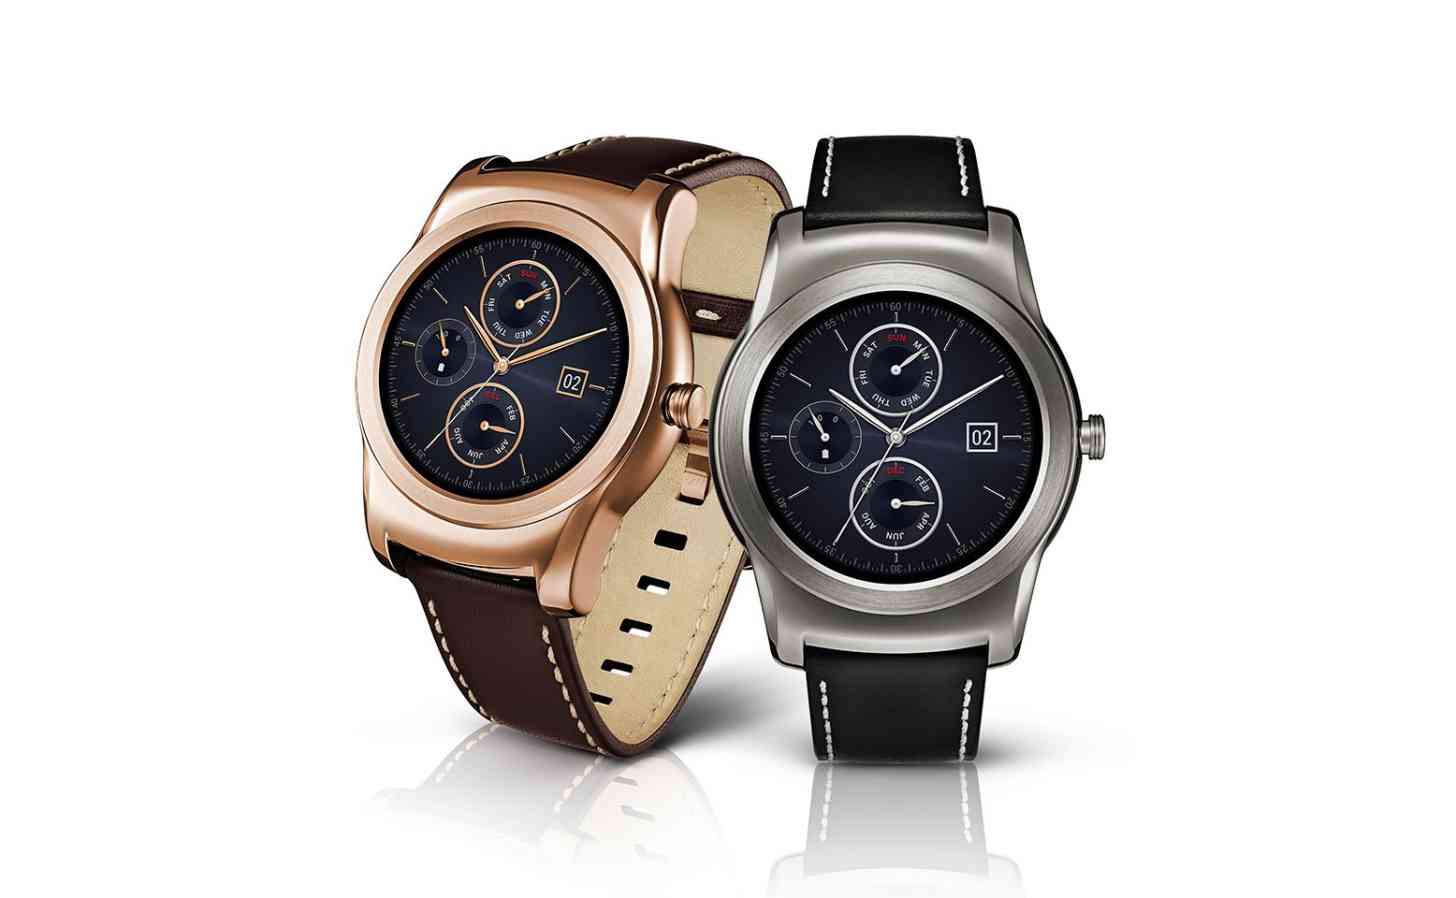 LG Watch Urbane Android Wear official